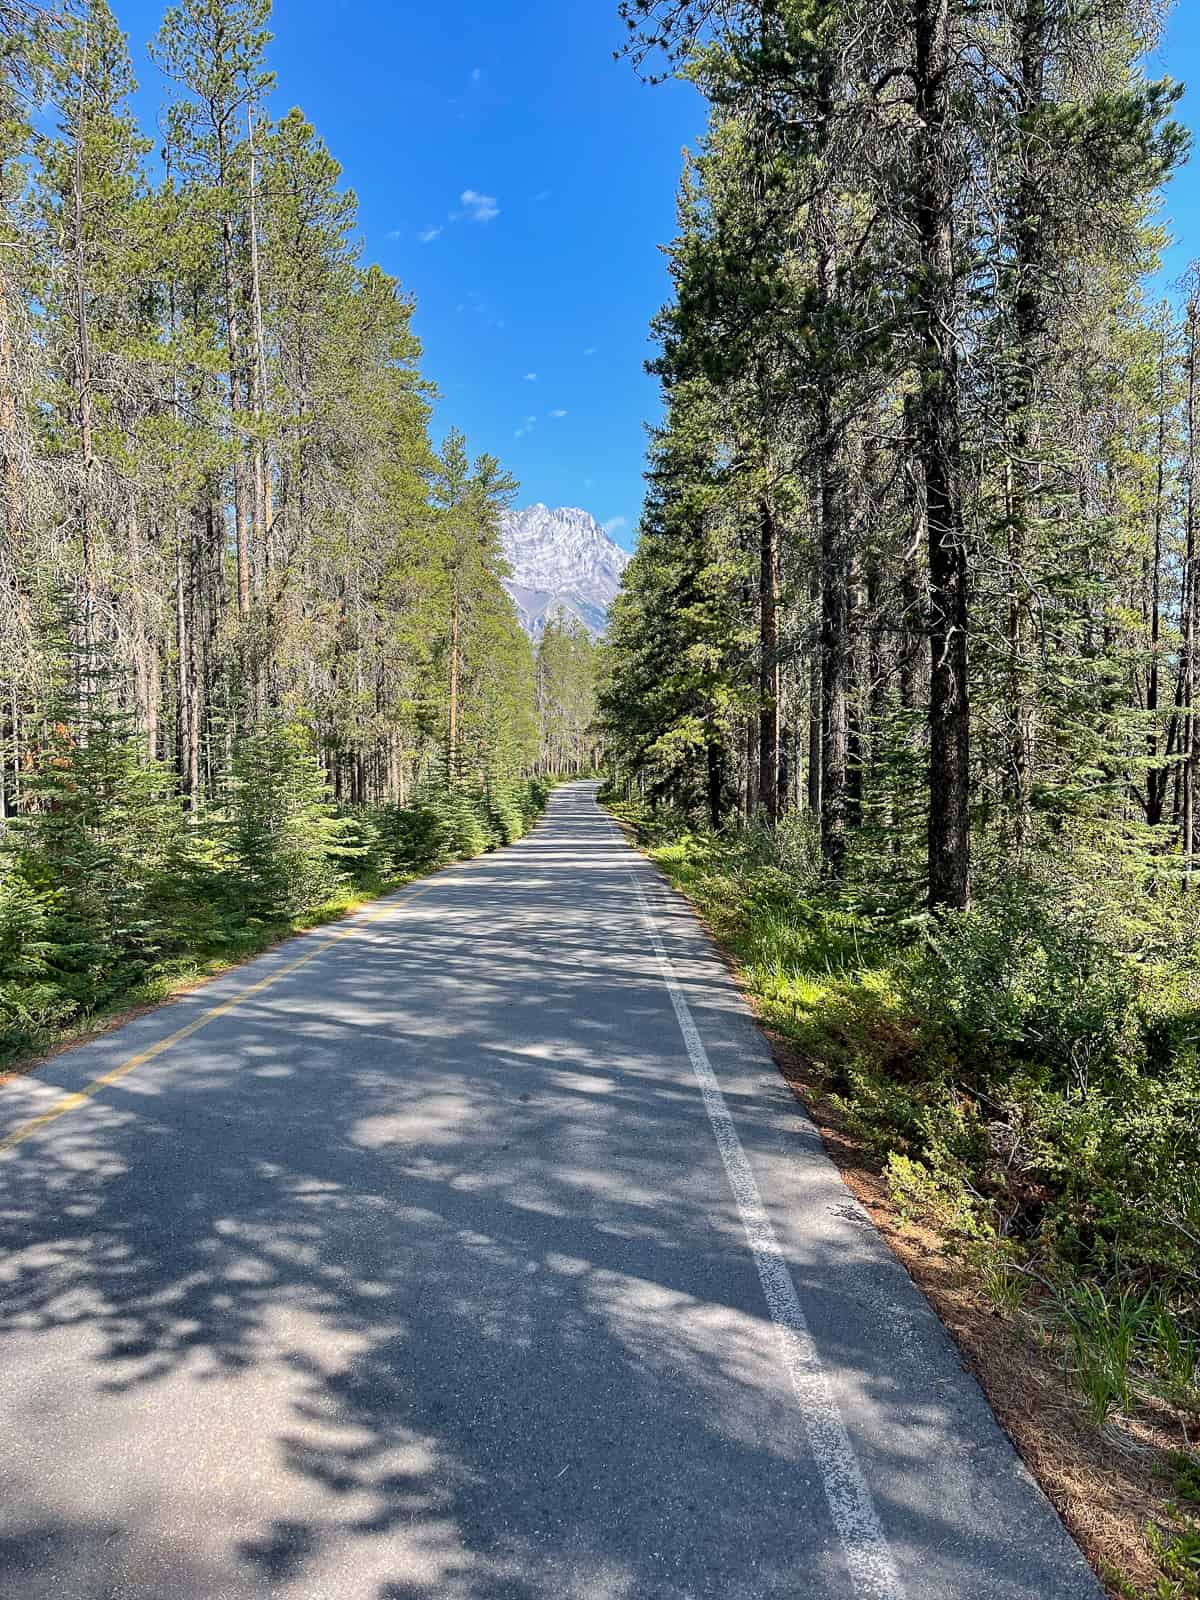 A long tree-lined road in the Banff area.